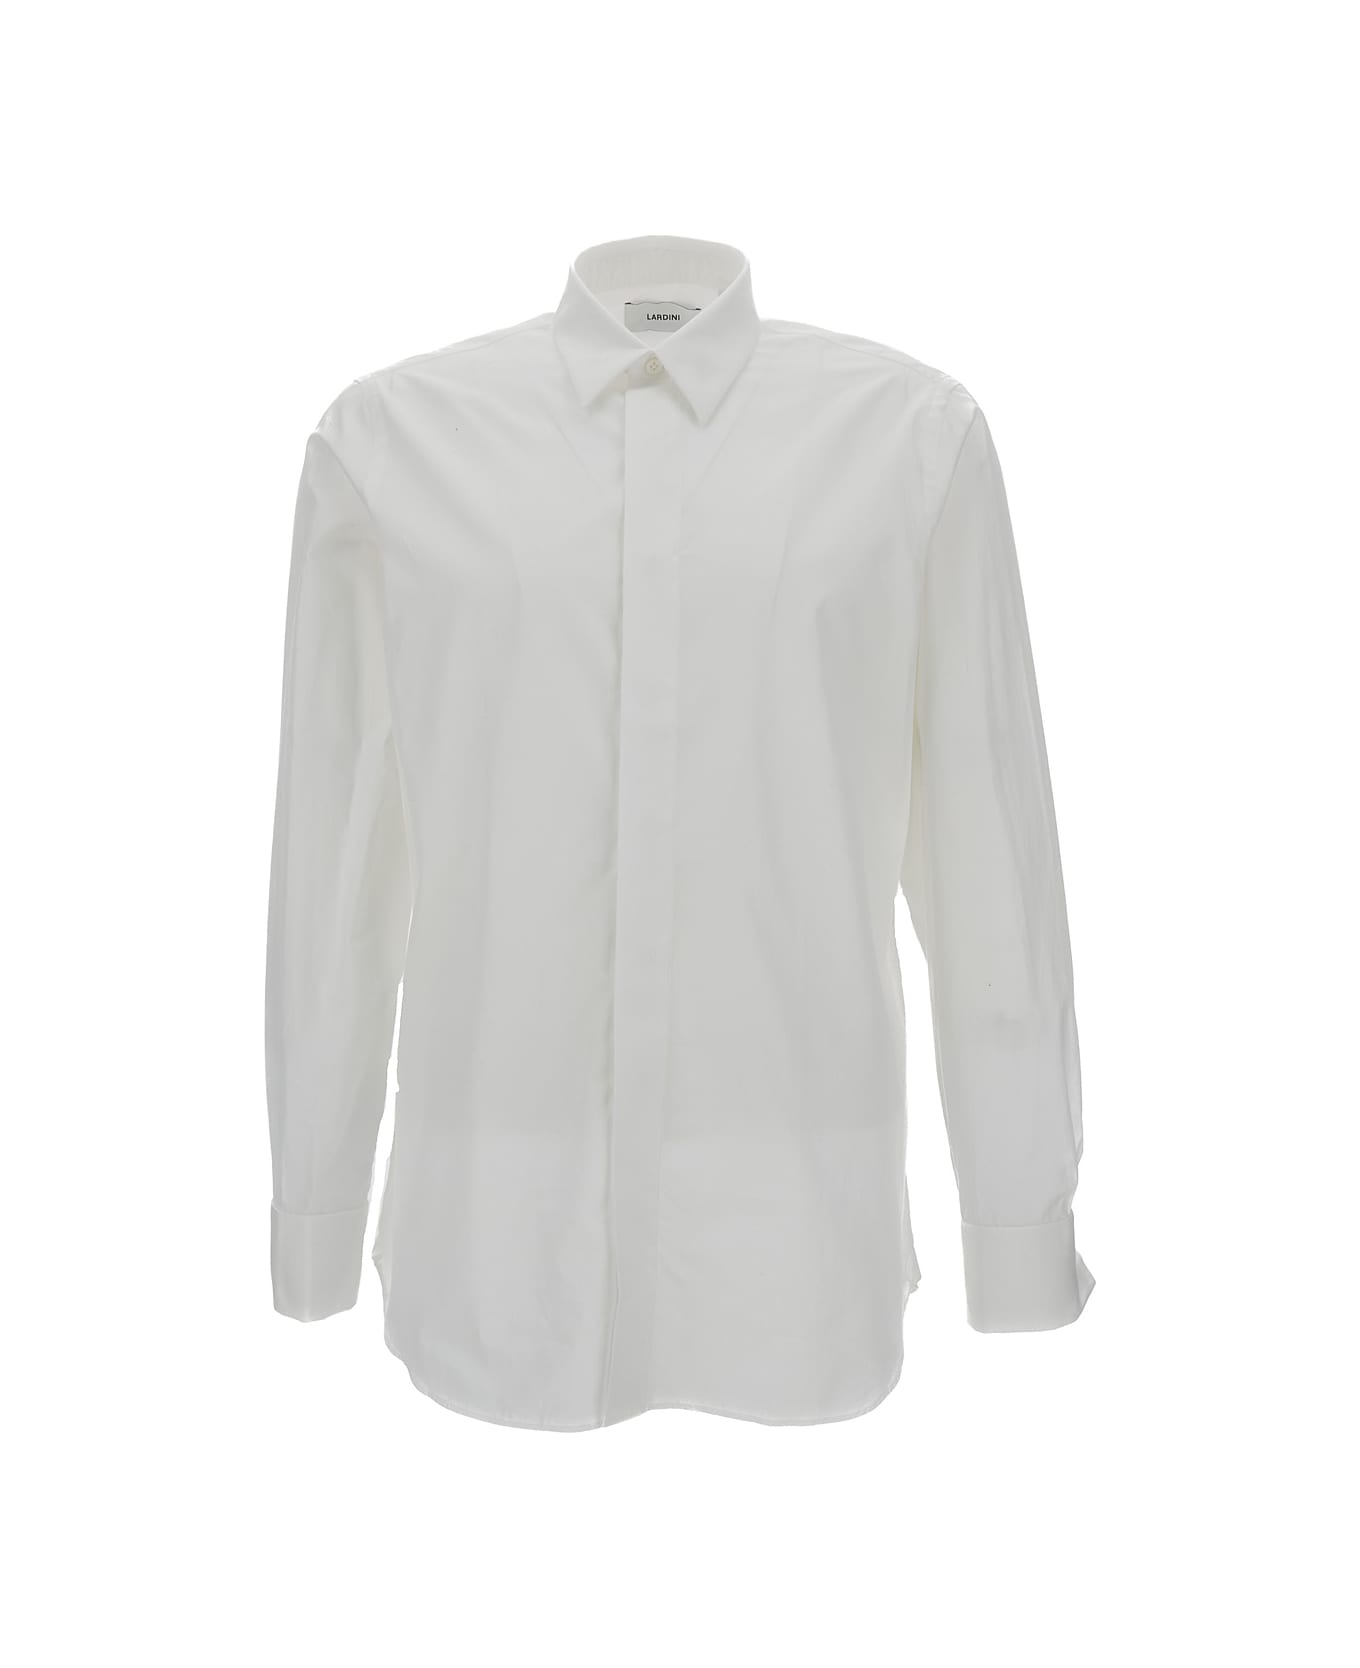 Lardini White Shirt With Concealed Closure In Cotton Man - White